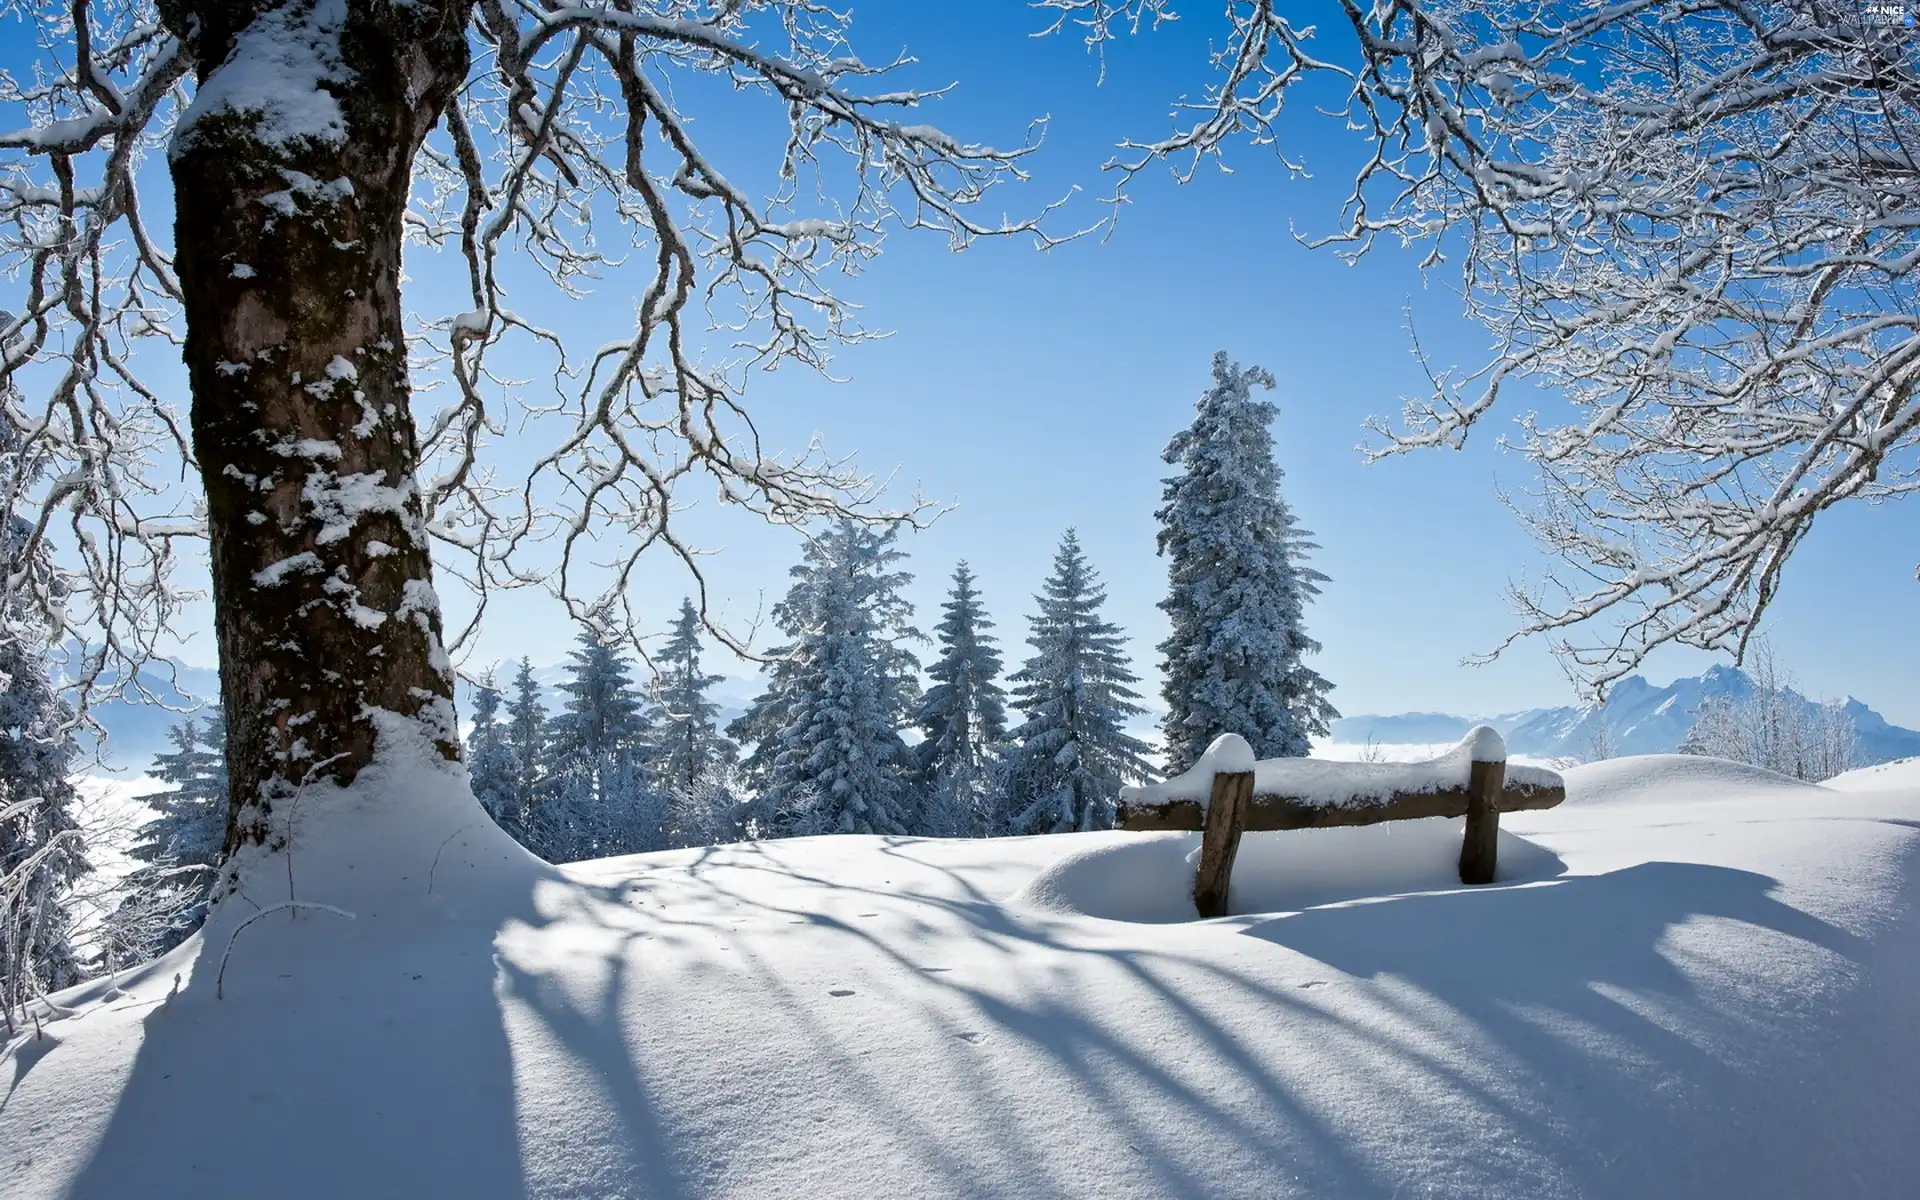 Sky, A snow-covered, Bench, trees